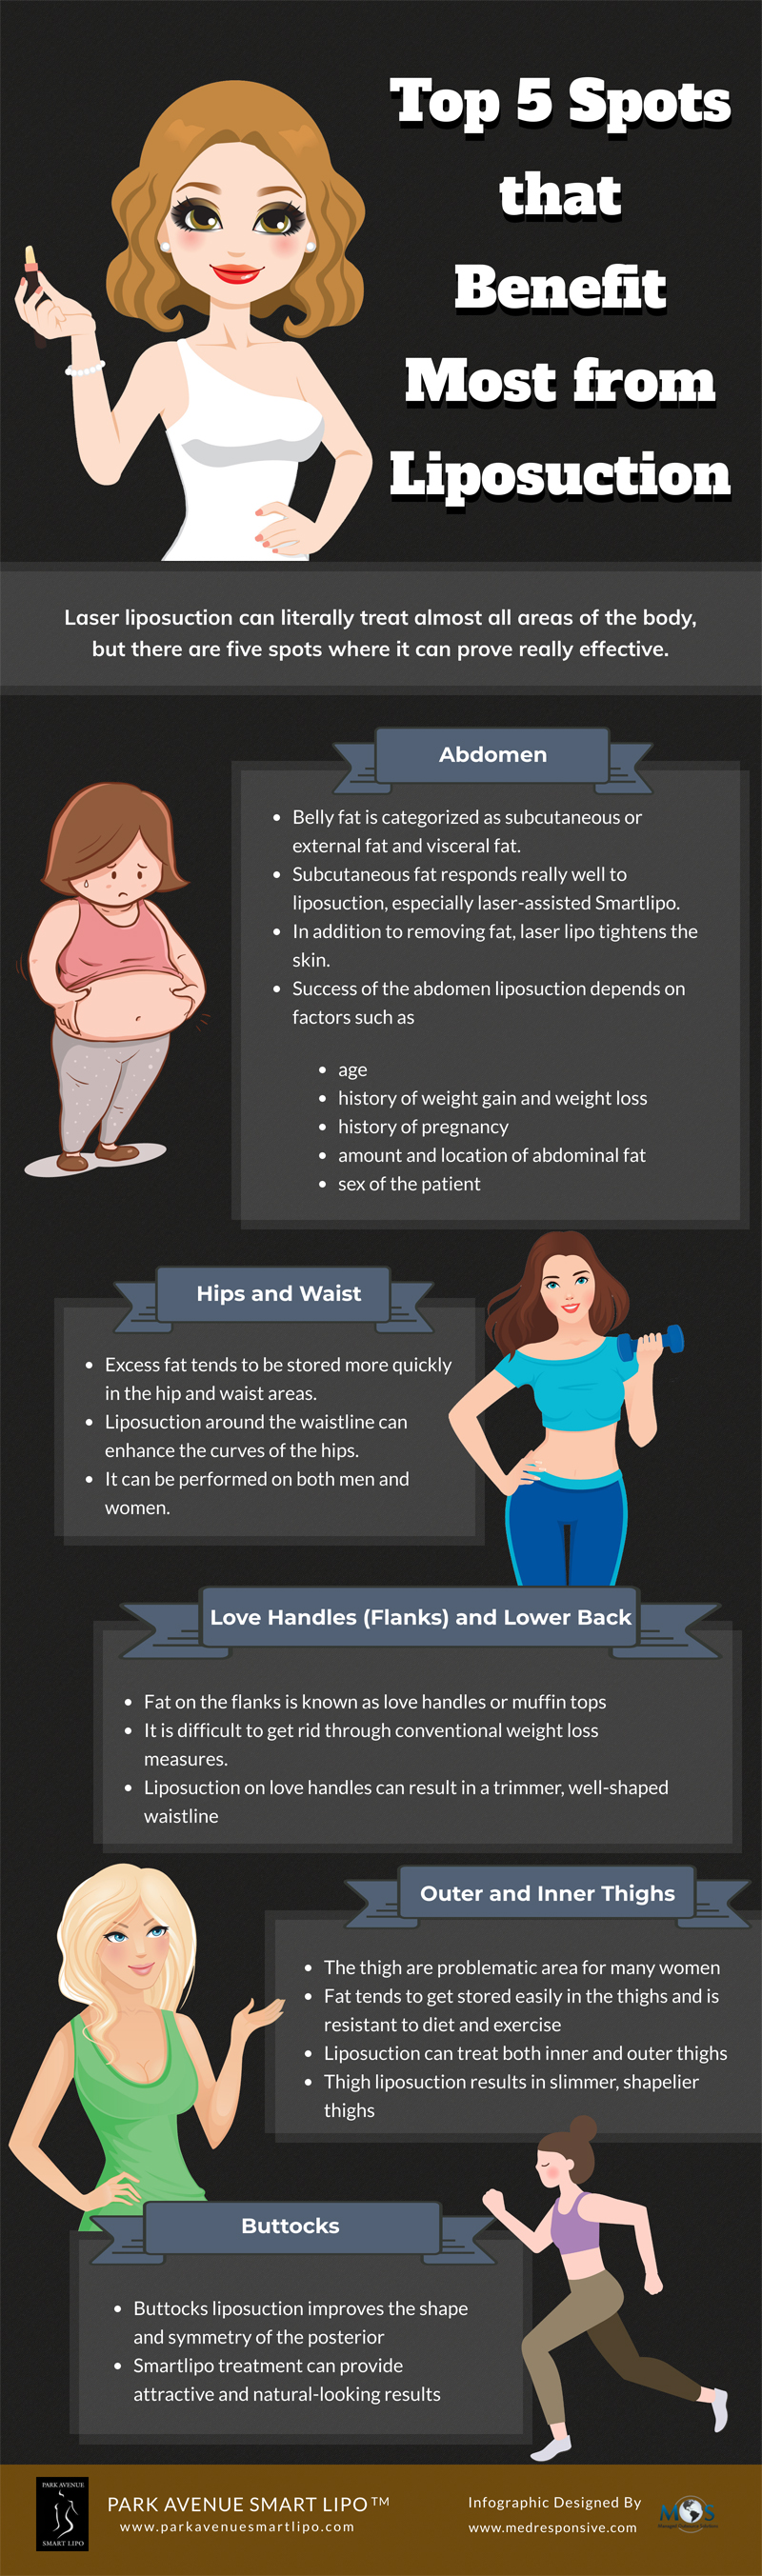 Top 5 Spots that Benefit Most from Liposuction [Infographic]